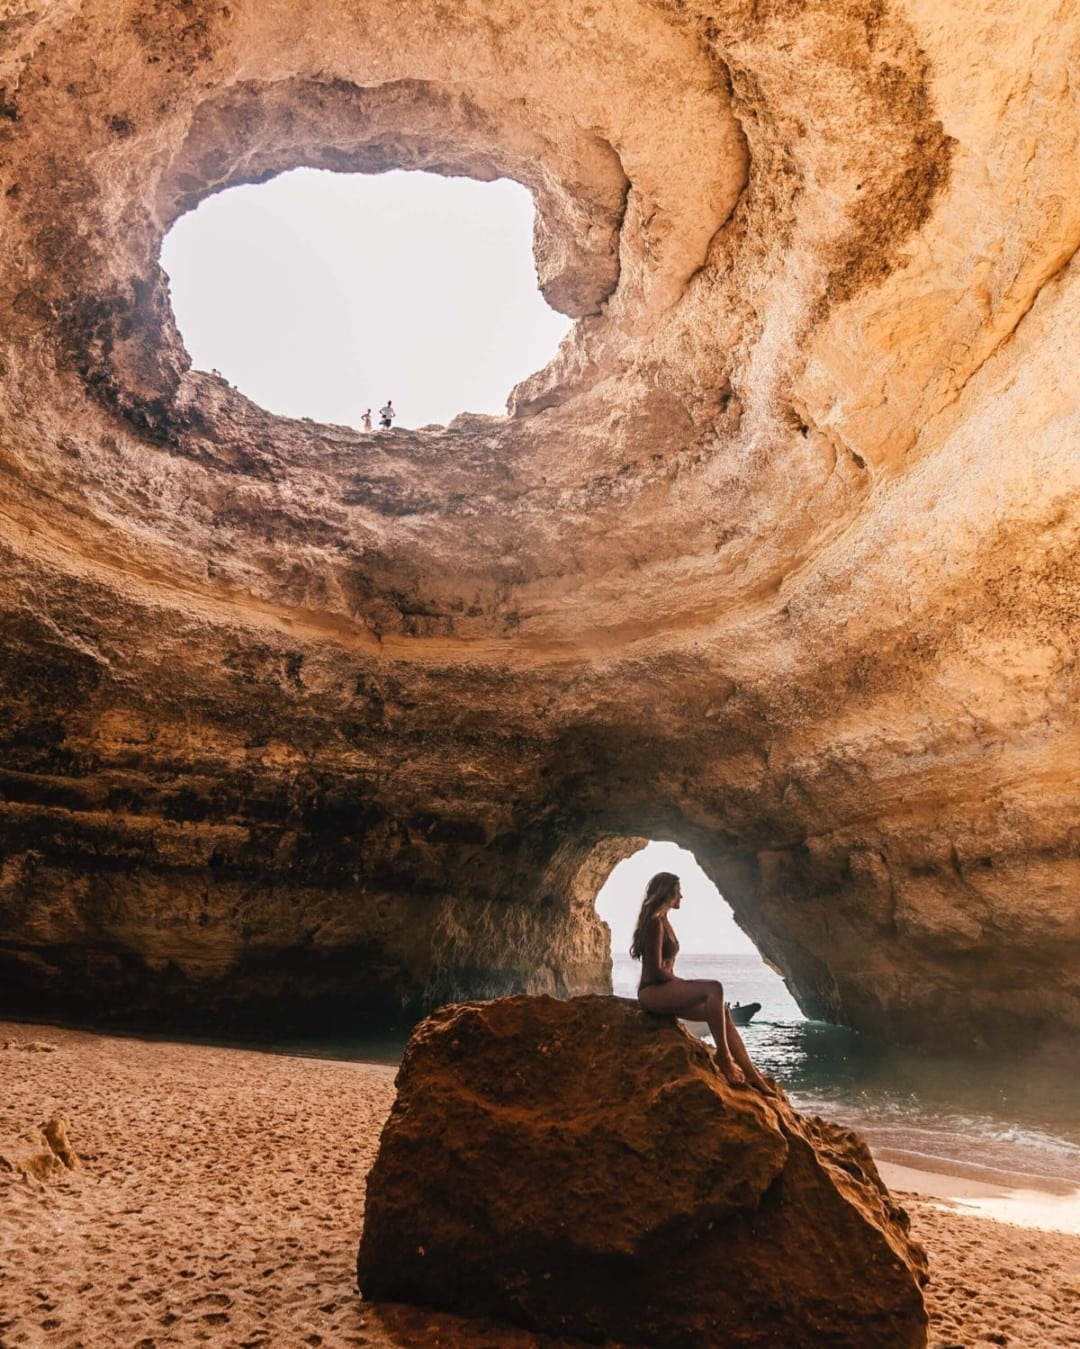 The Benagil Cave Bucket List Guide: Everything You Need to Know | Benagil Caves | Algarve sea caves | Where are the Benagil Caves located | How to see the Benagil Cave | Portugal travel tips | Algarve travel tips | What to do in Algarve Portugal |